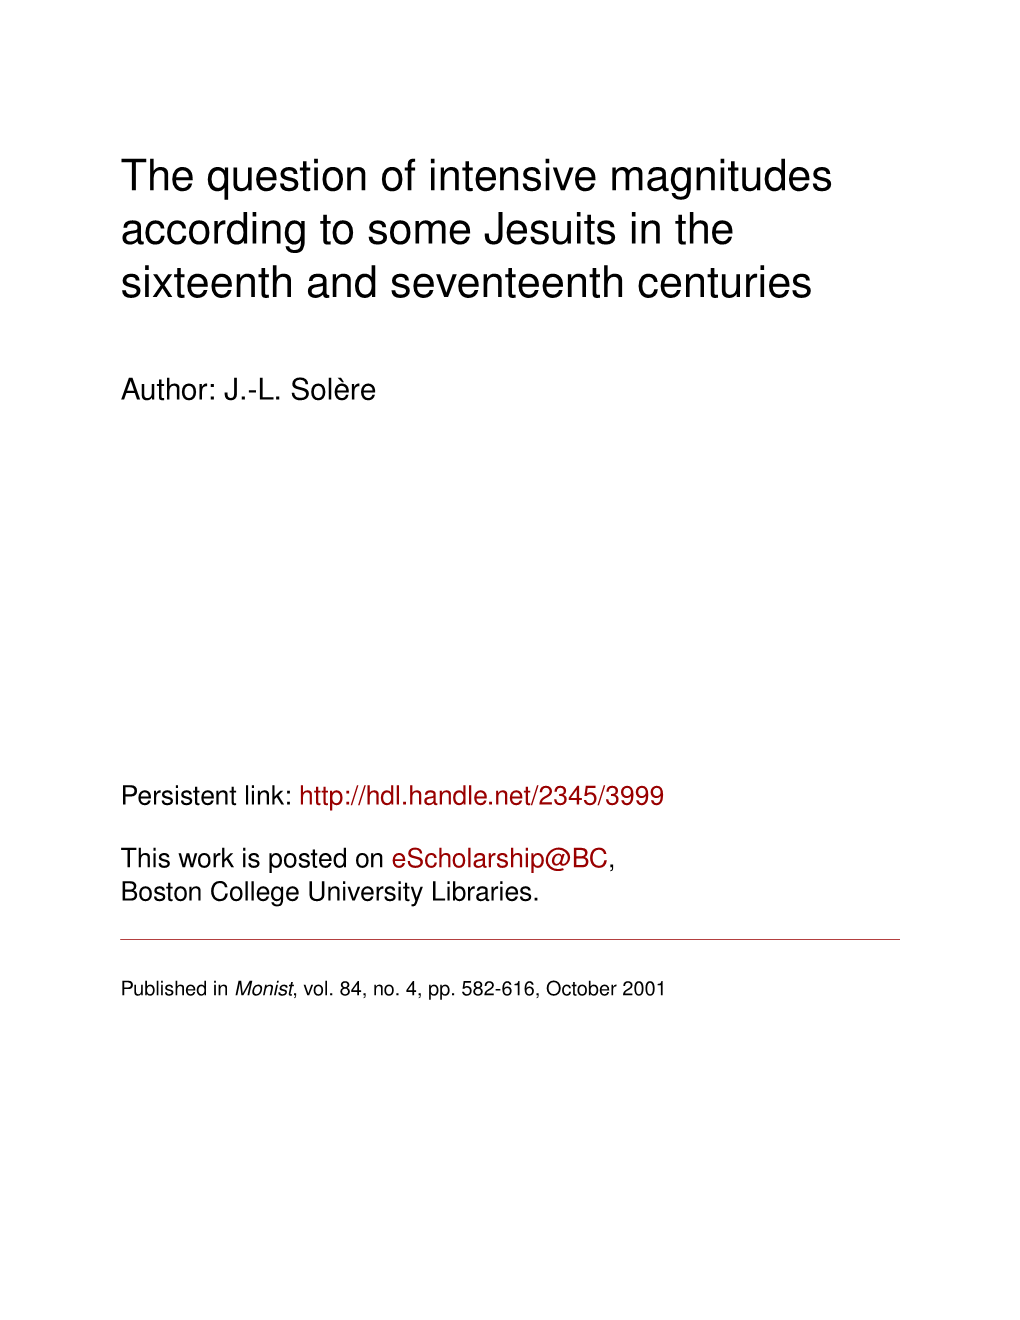 The Question of Intensive Magnitudes According to Some Jesuits in the Sixteenth and Seventeenth Centuries